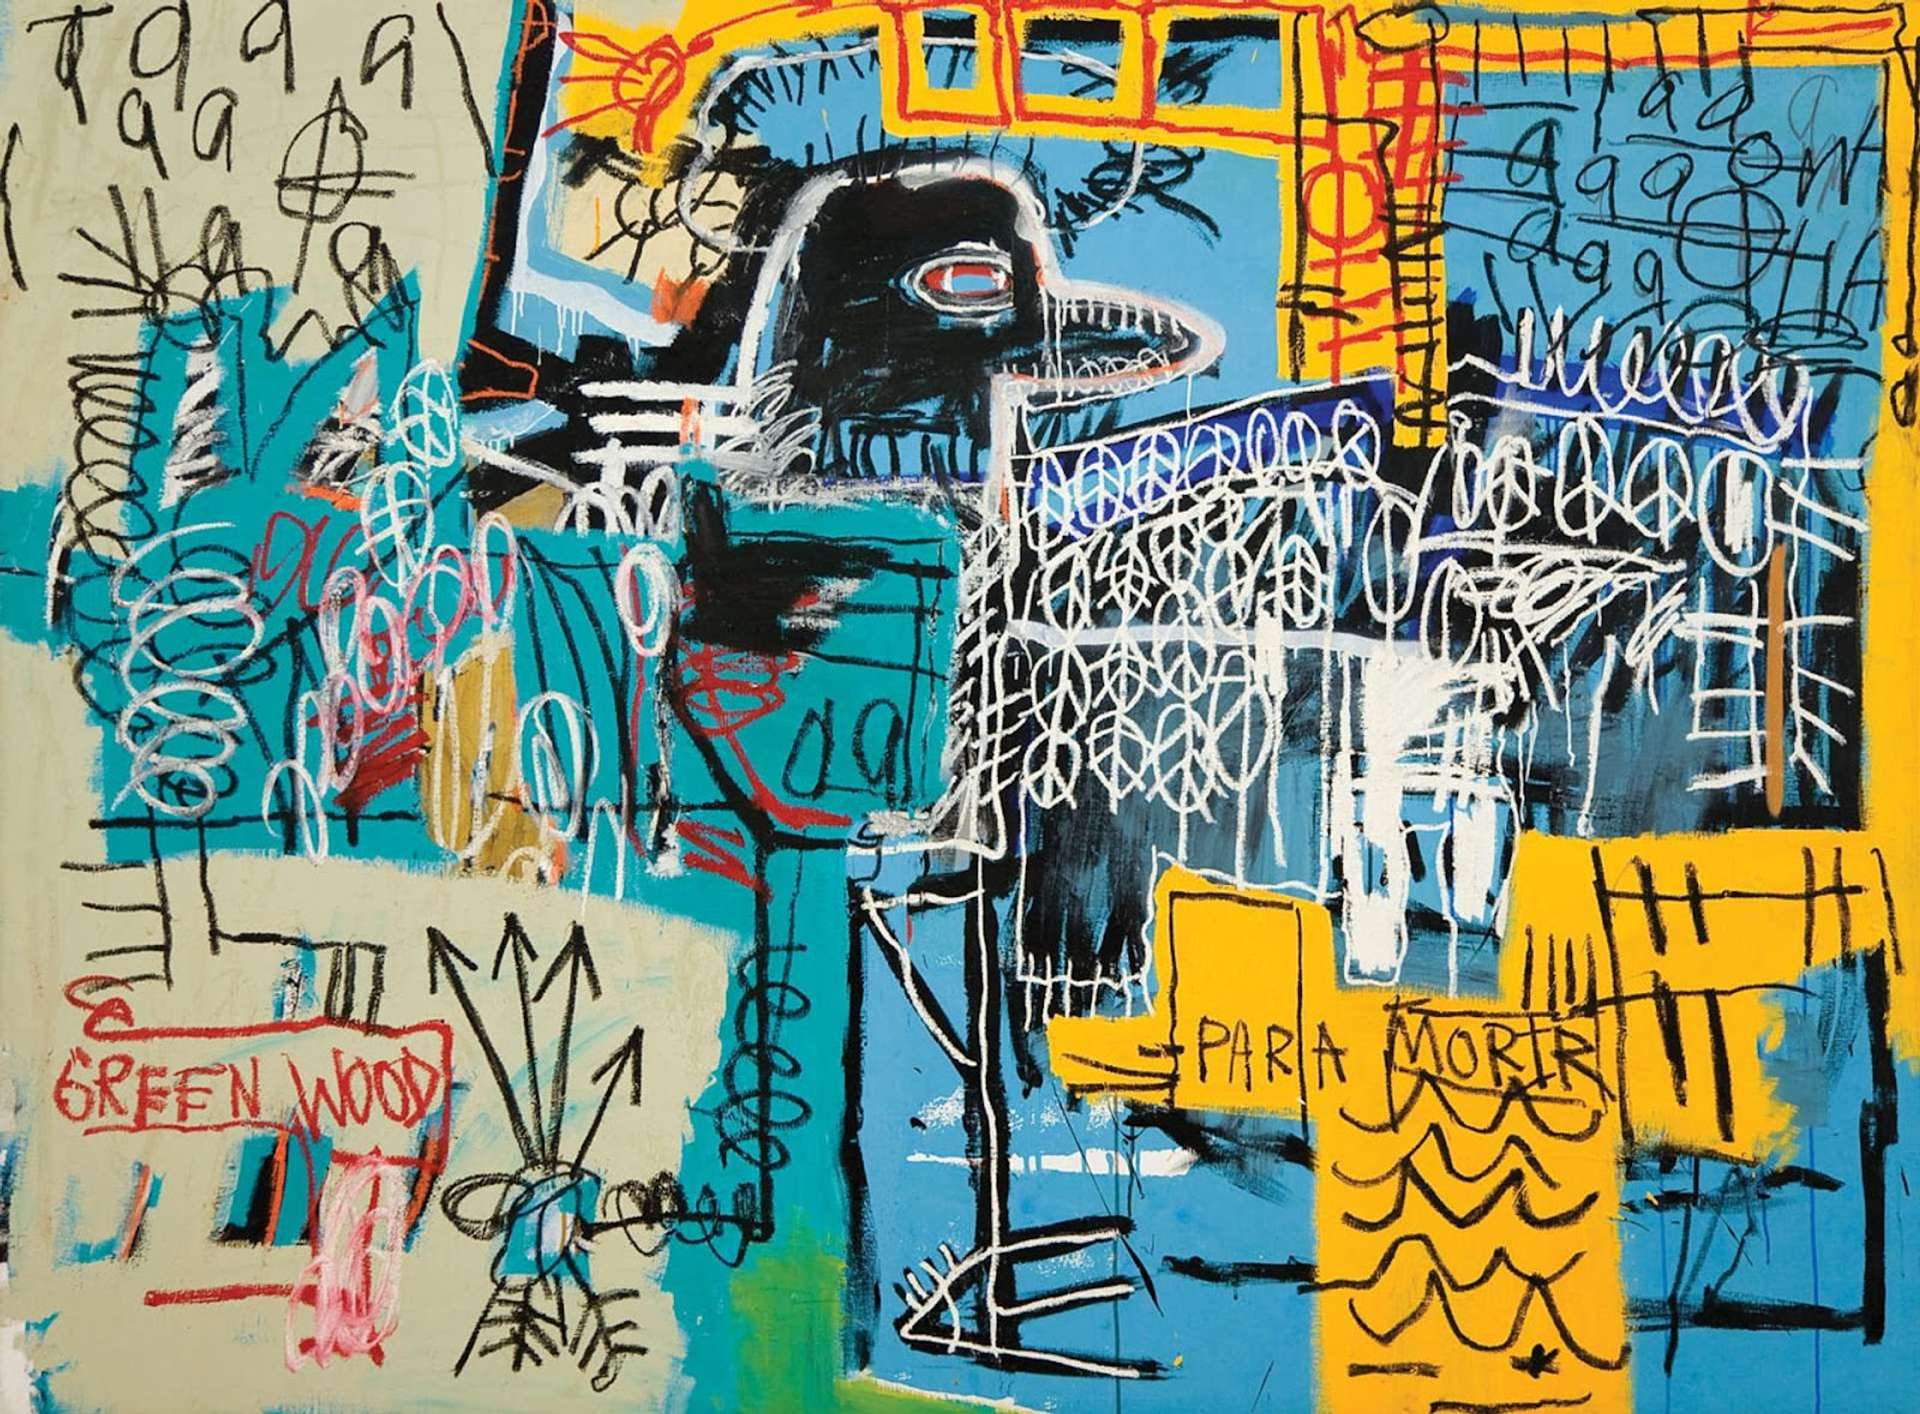 Jean-Michel Basquiat’s Bird On The Money. A Neo-Expressionist painting of a bird surrounded by graffiti style sketches and characters.